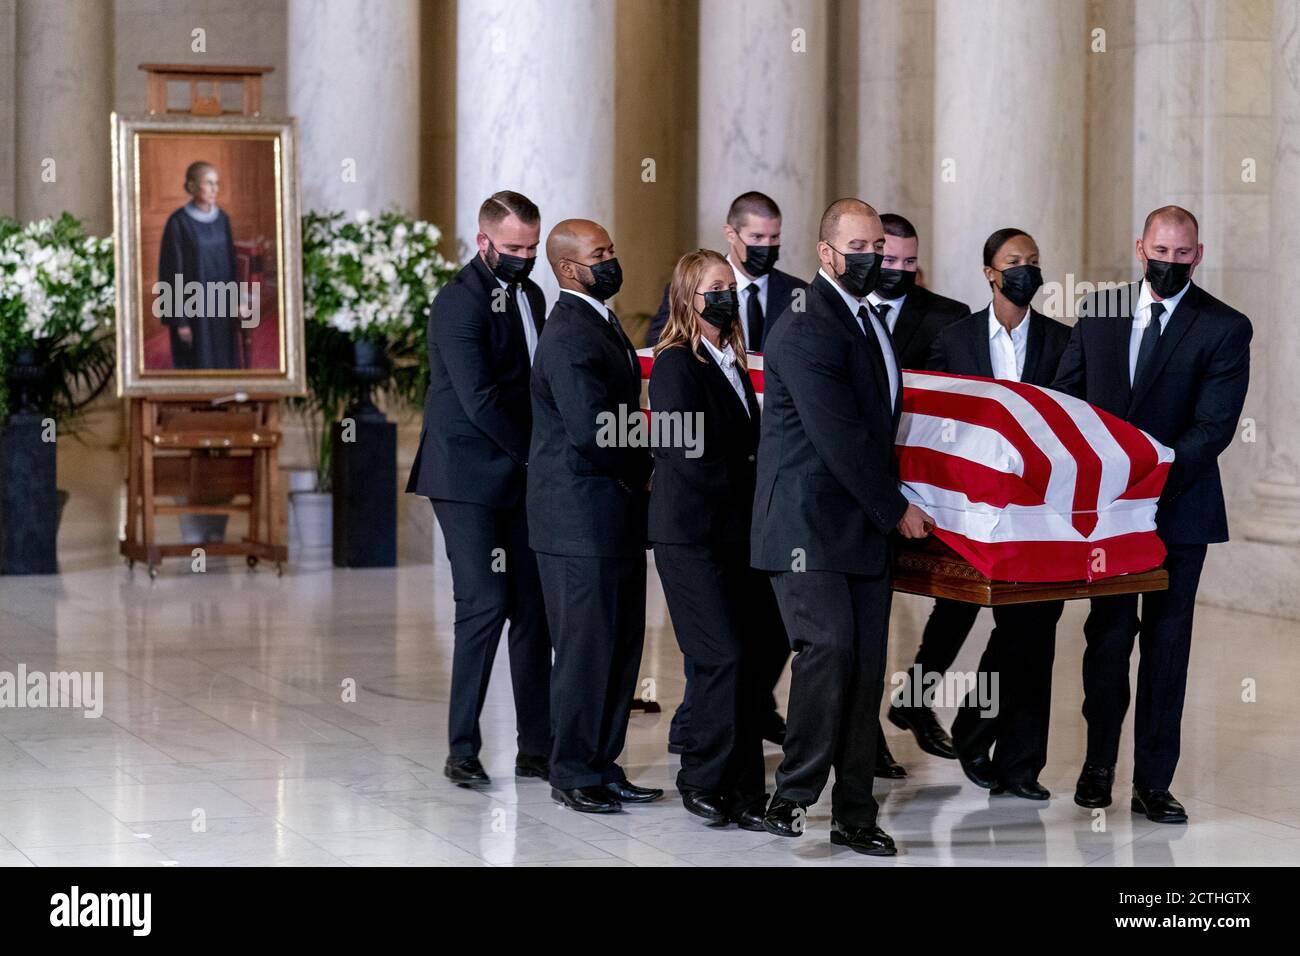 Washington, United States. 23rd Sep, 2020. The flag-draped casket of Justice Ruth Bader Ginsburg, carried by Supreme Court police officers, arrives in the Great Hall at the Supreme Court in Washington, DC on Wednesday, September 23, 2020. Ginsburg, 87, died of cancer on September 18. Pool Photo by Andrew Harnik/UPI Credit: UPI/Alamy Live News Stock Photo